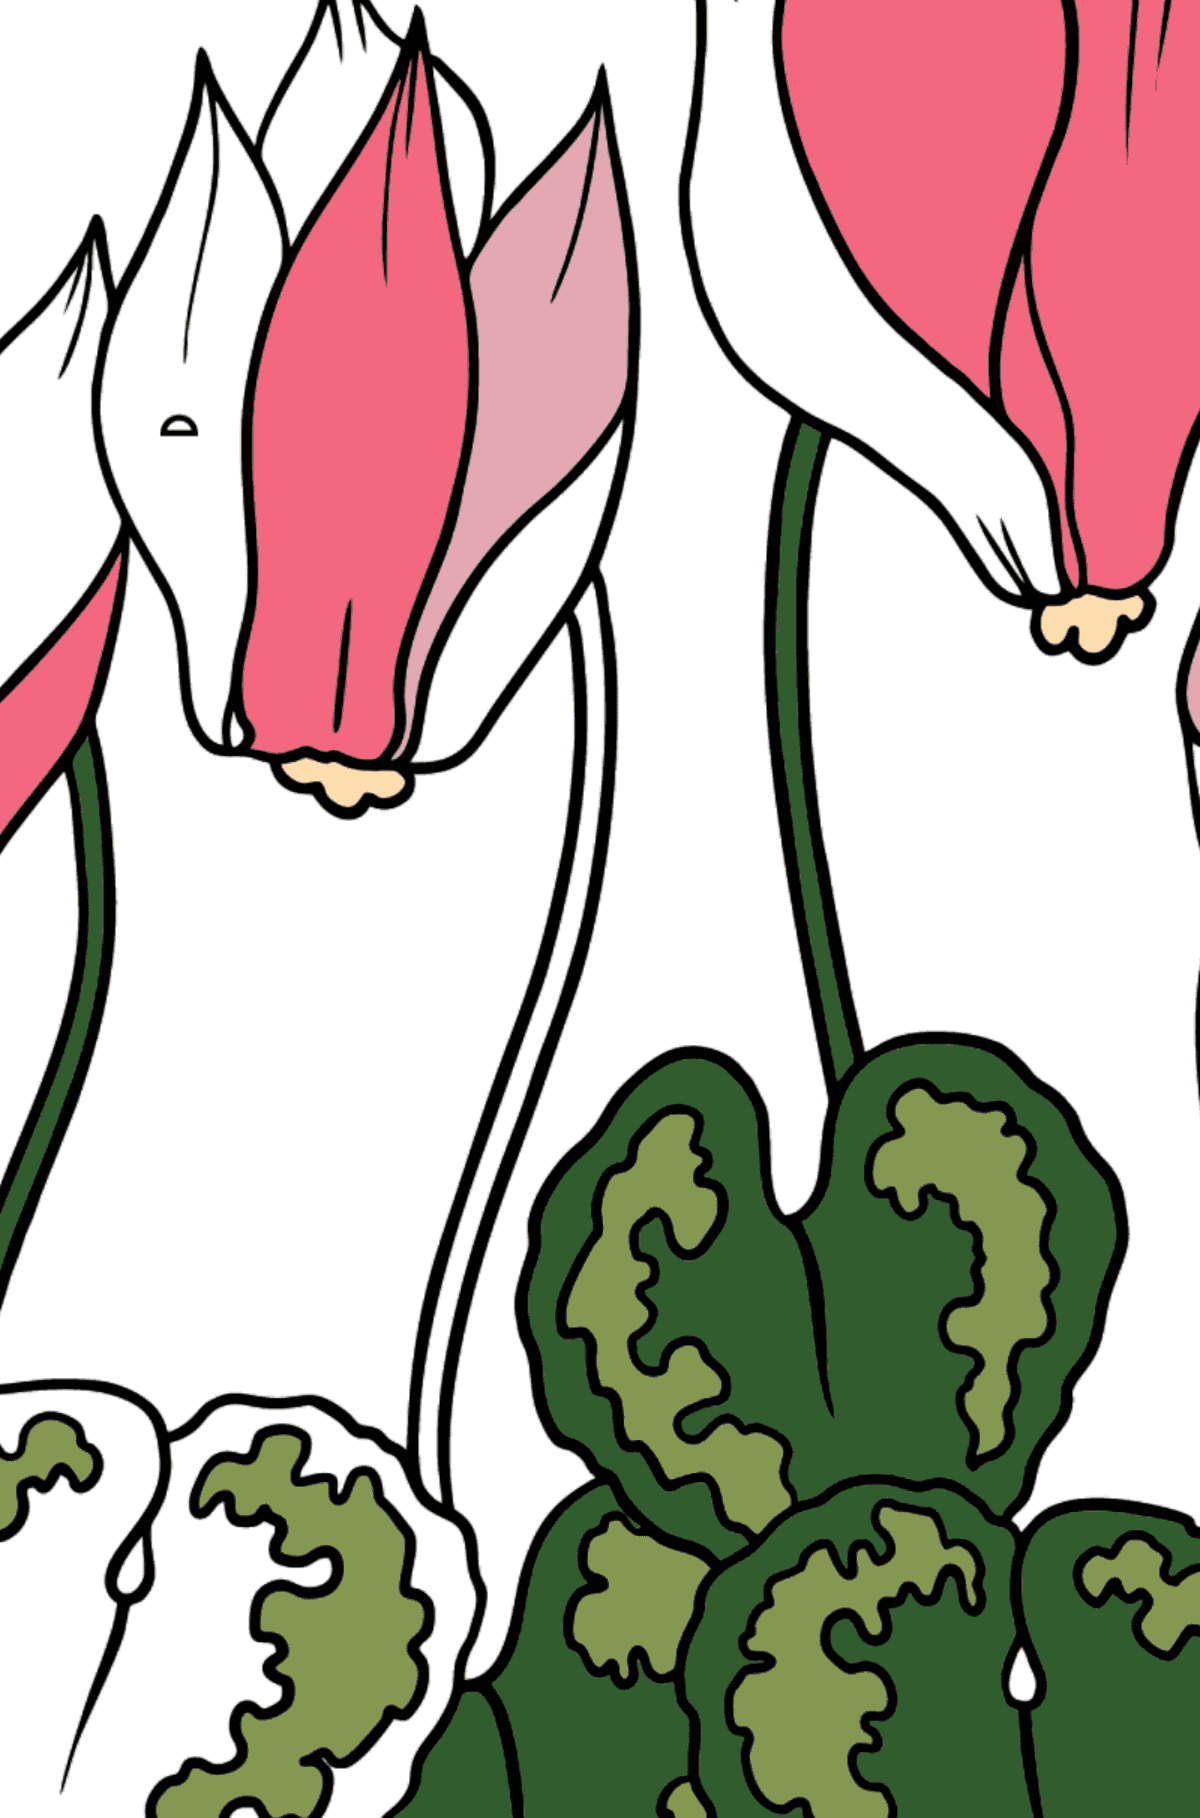 Coloring Page Red and Pink Cyclamen - Coloring by Geometric Shapes for Kids